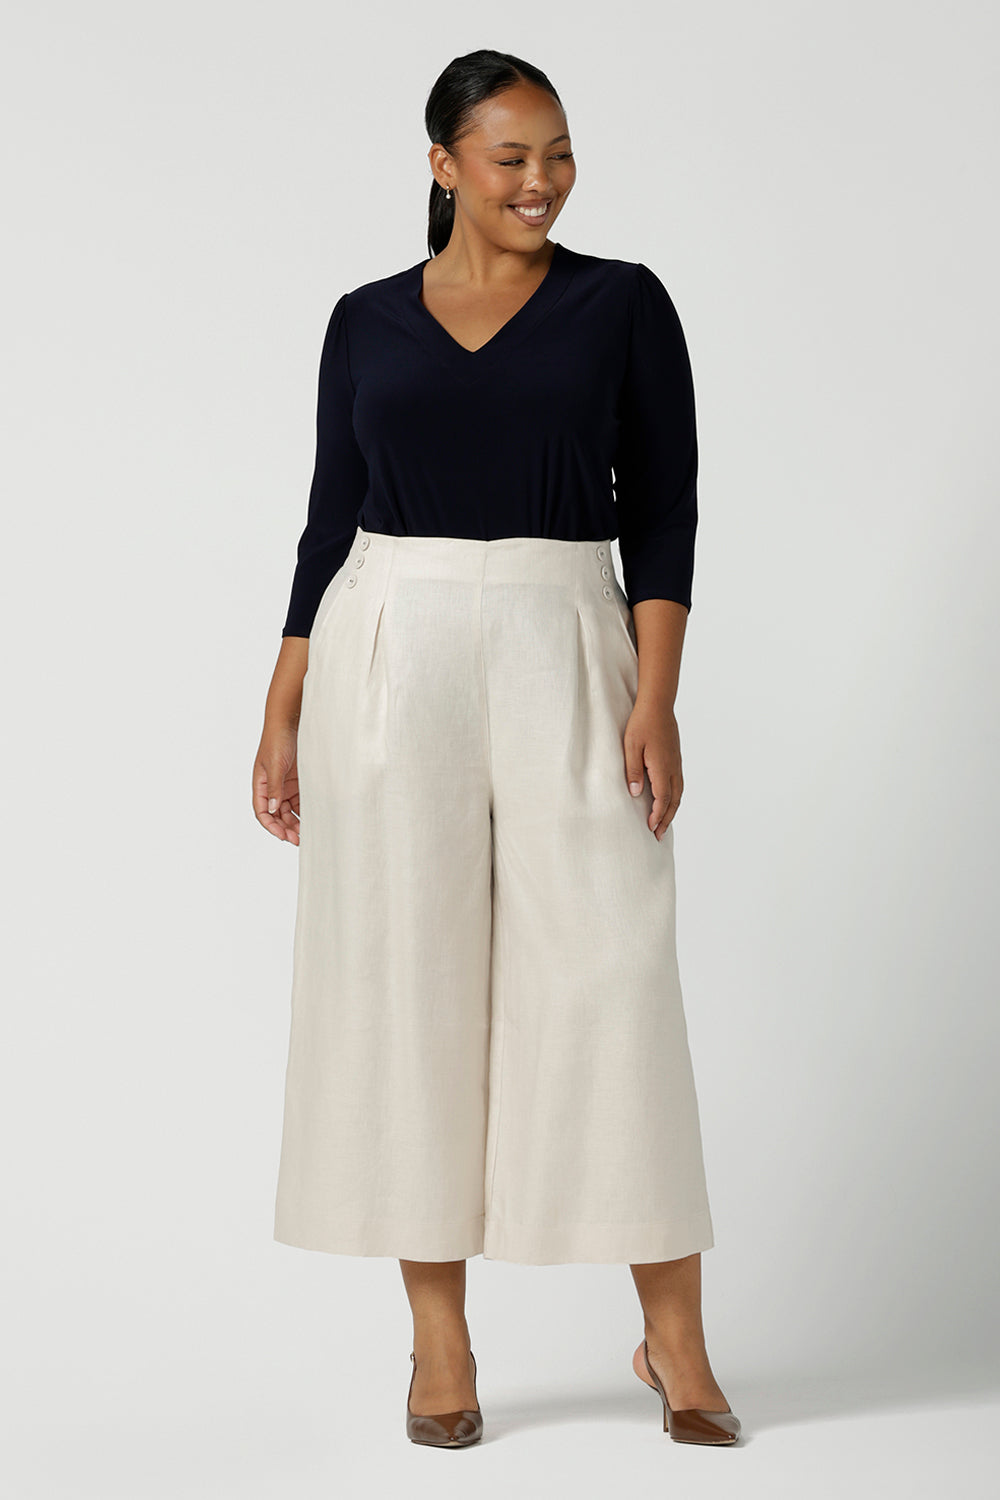 A curvy size 16 woman wears a vida top in Navy with a V-neckline and 3/4 sleeves. Made in comfortable jersey for corporate workwear to casual wear. Styled back with Nik Pant in parchment linen, a wide leg culotte. Made in Australia for women size 8 - 24. 